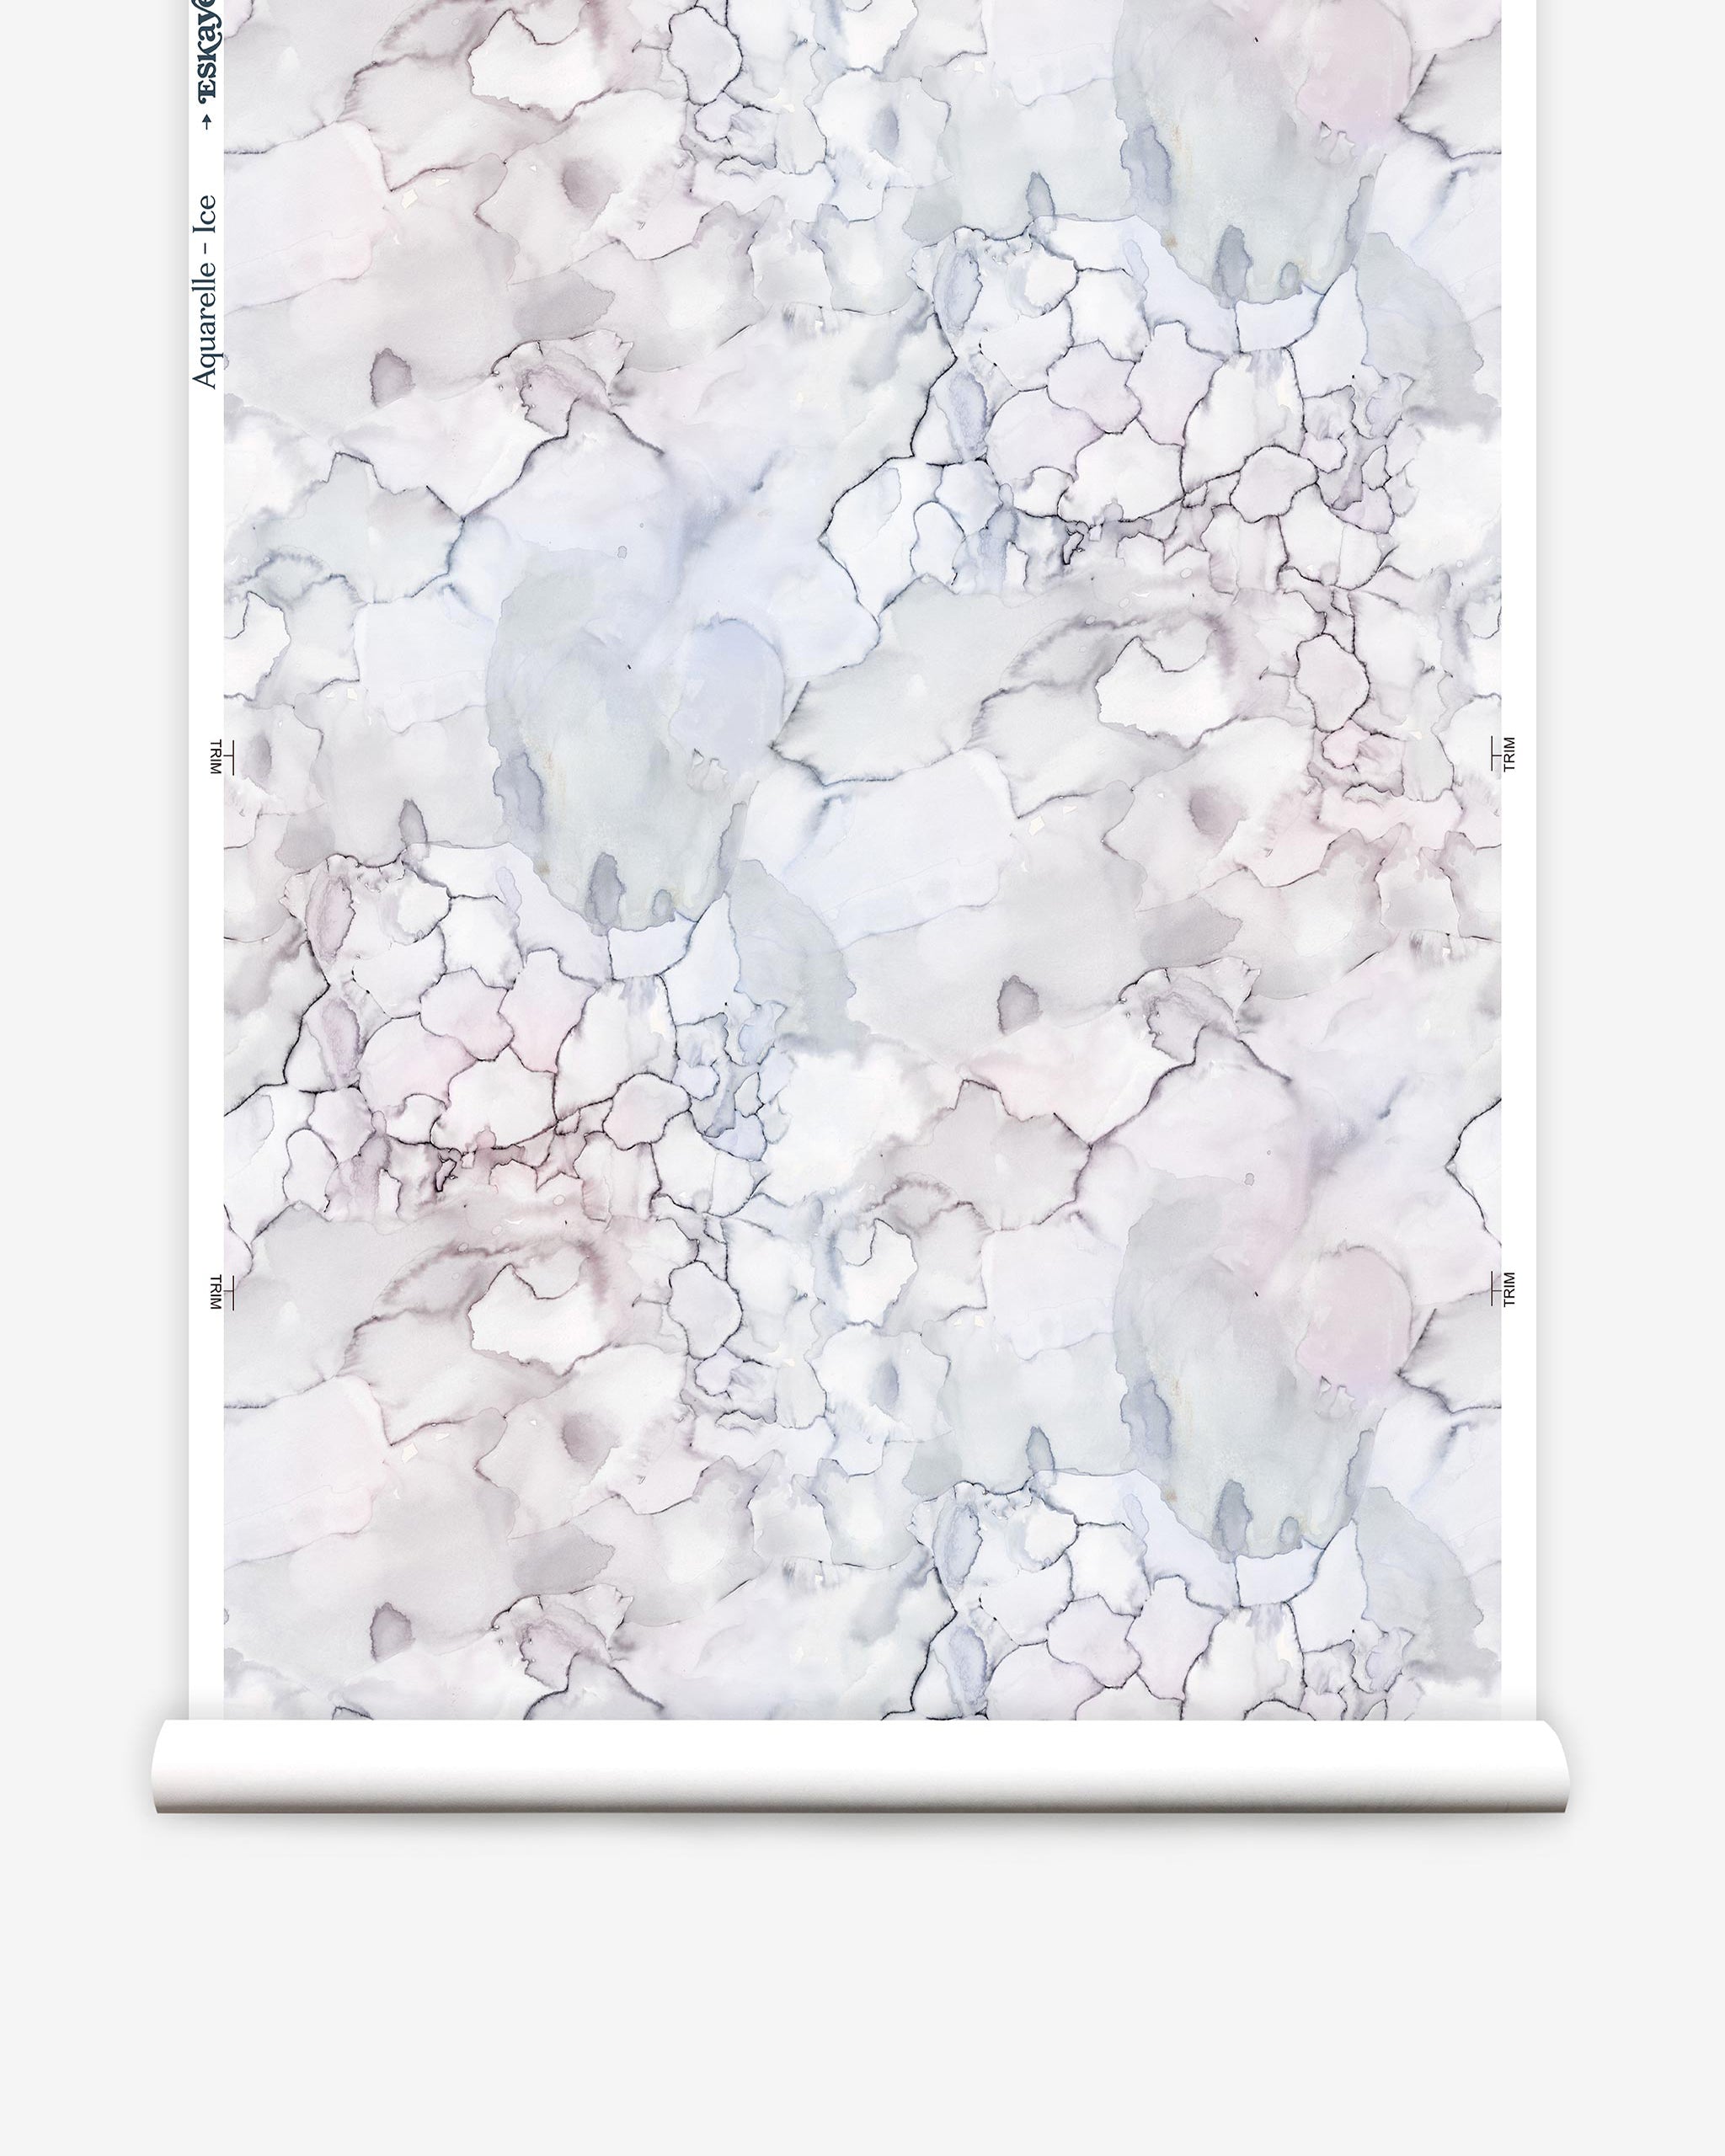 Partially unrolled wallpaper yardage in an abstract textural print in shades of white, purple and gray.